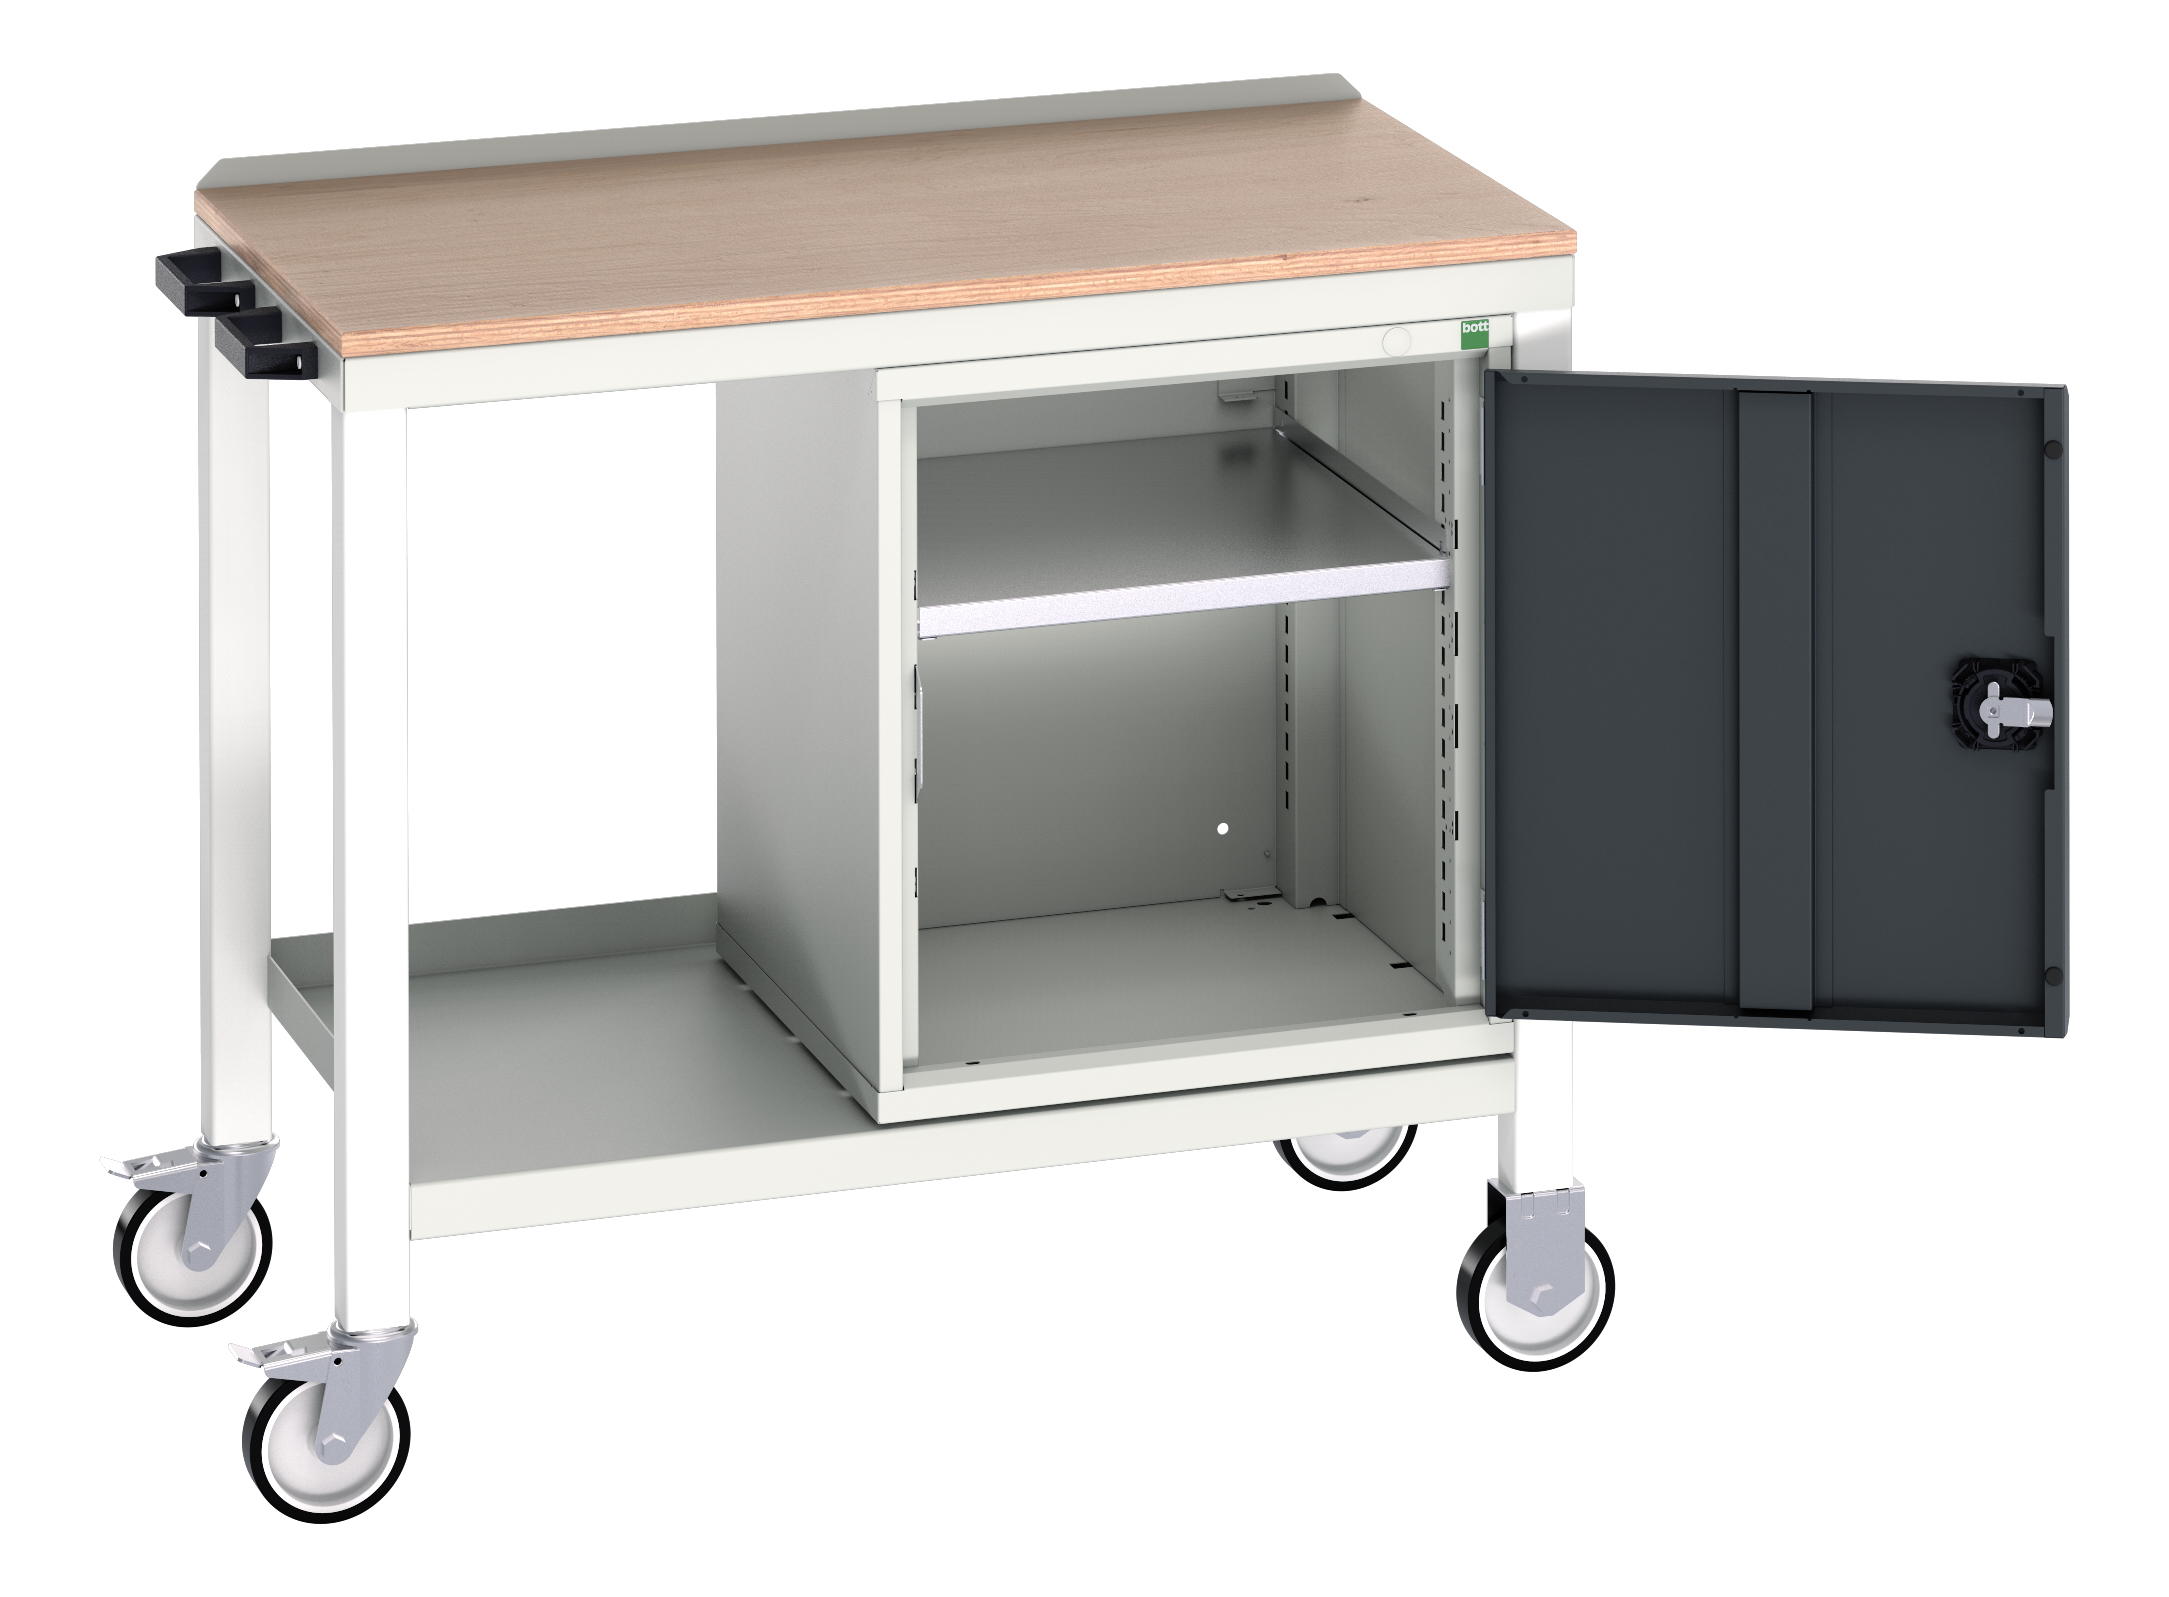 Bott Verso Mobile Welded Bench With Full Cupboard - 16922803.19